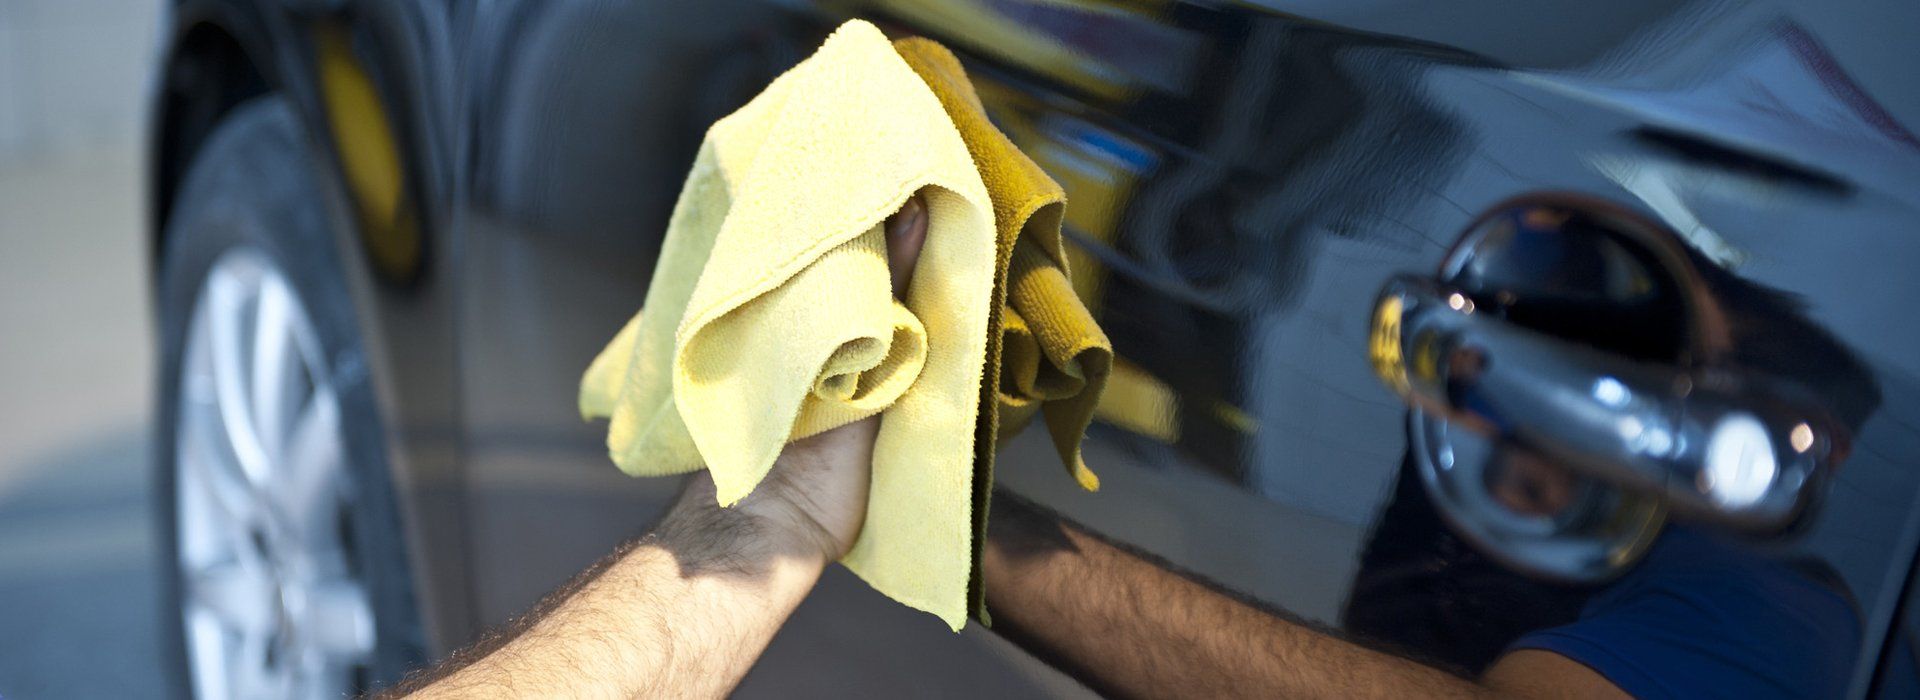 Contact us for high-quality hand car wash services in Belfast